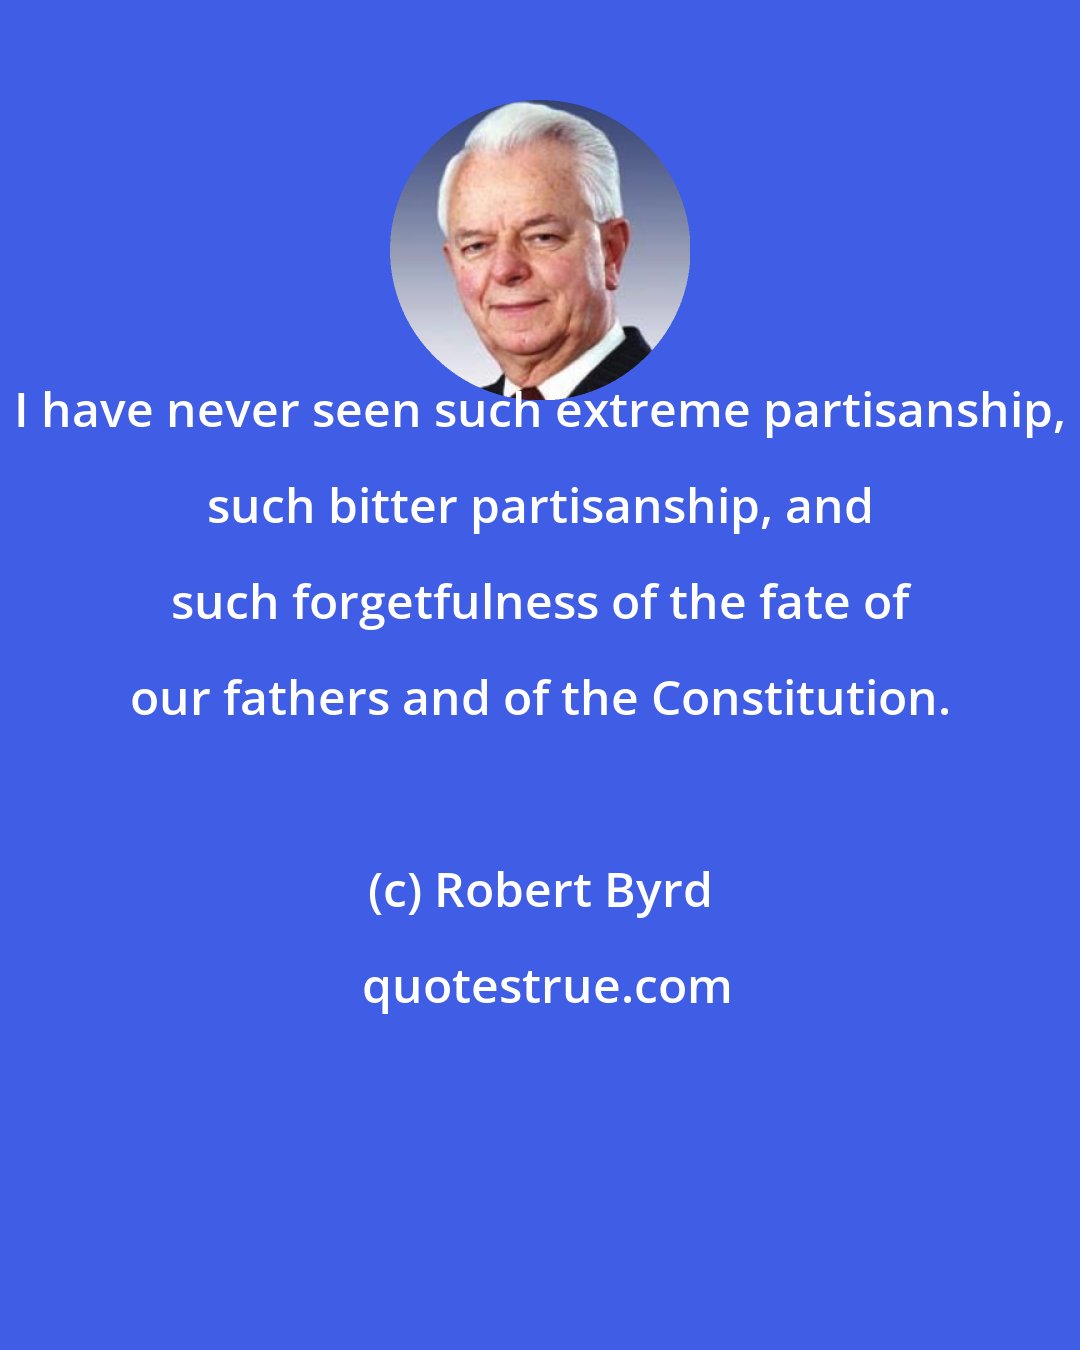 Robert Byrd: I have never seen such extreme partisanship, such bitter partisanship, and such forgetfulness of the fate of our fathers and of the Constitution.